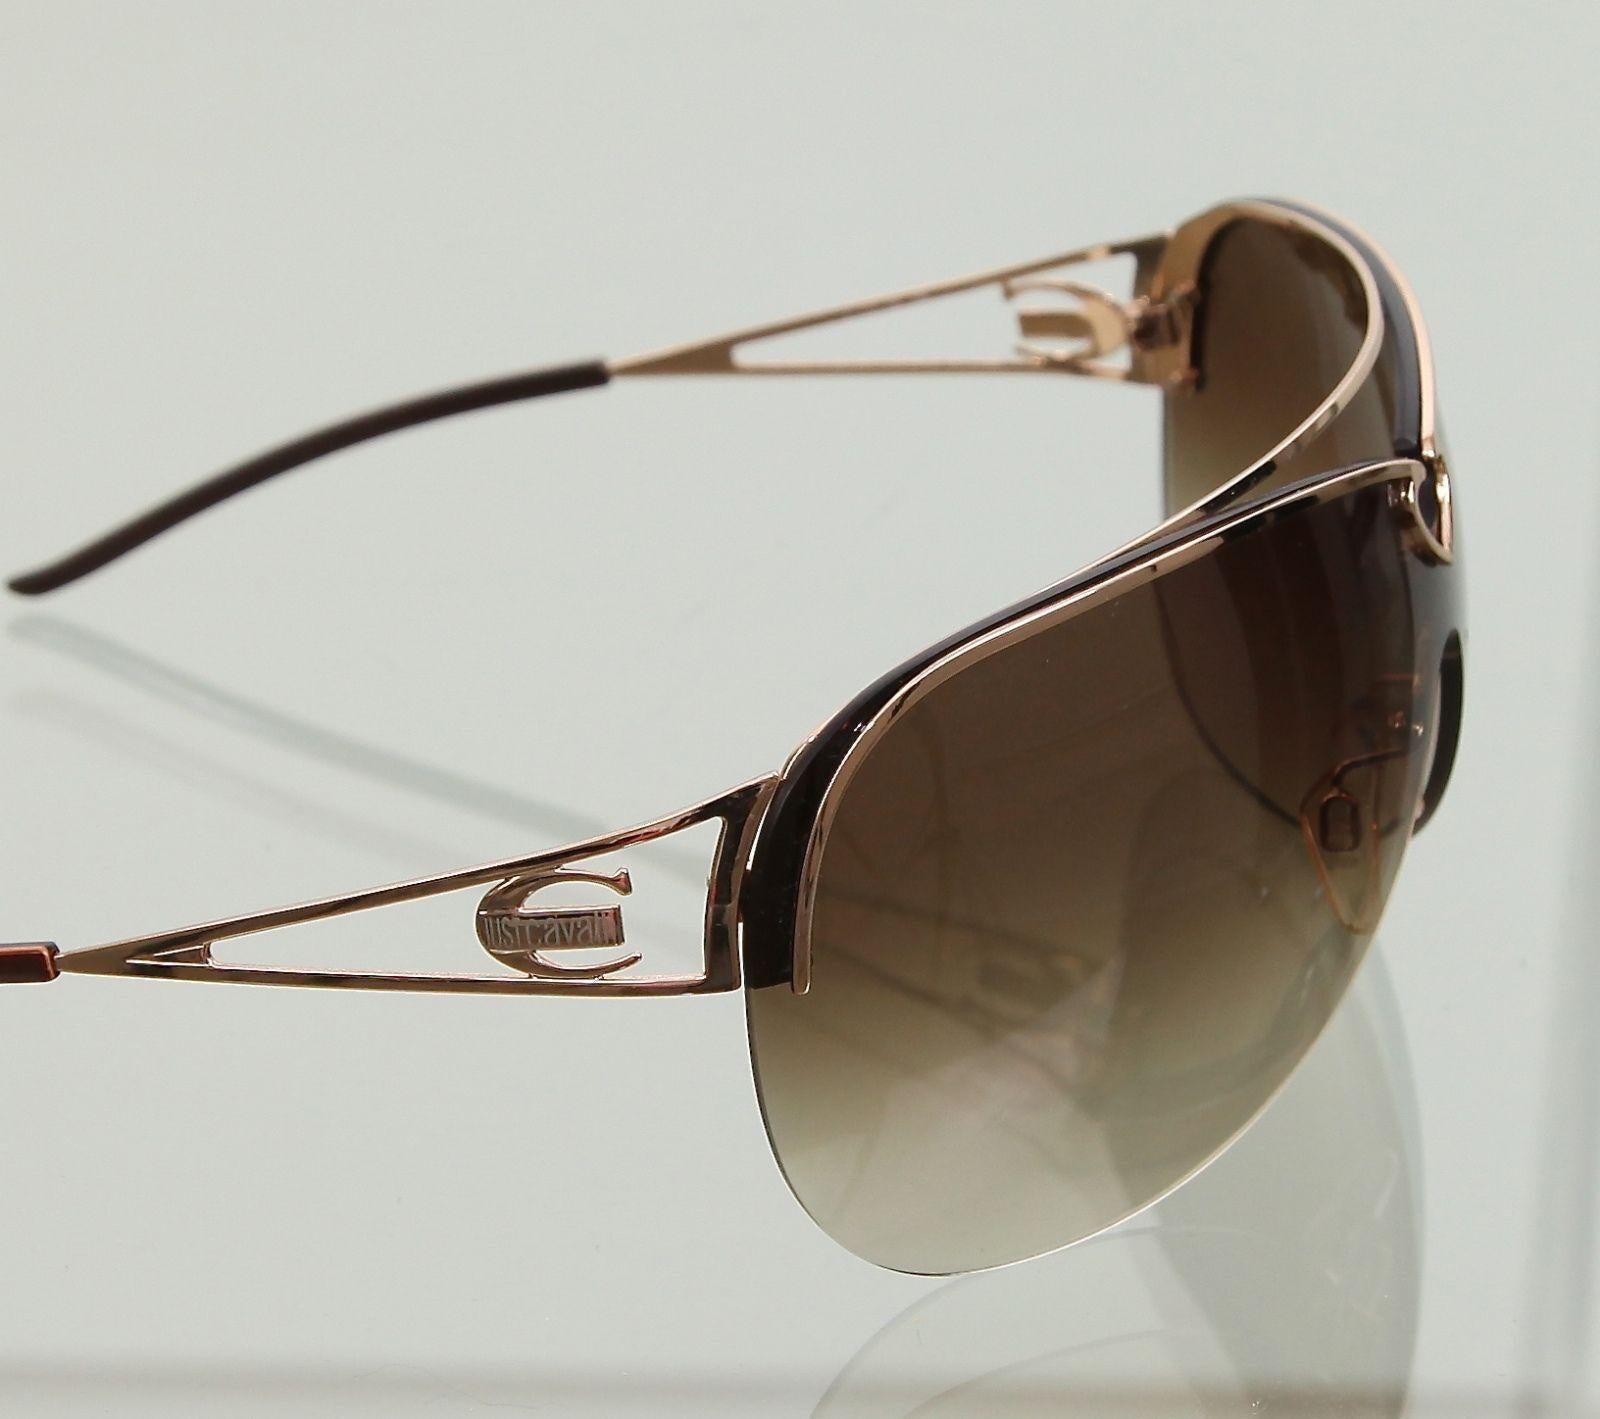 ROBERTO CAVALLI Brown Sunglasses Gradient Lens Shield Gold Hardware W/Case In Good Condition For Sale In Hollywood, FL